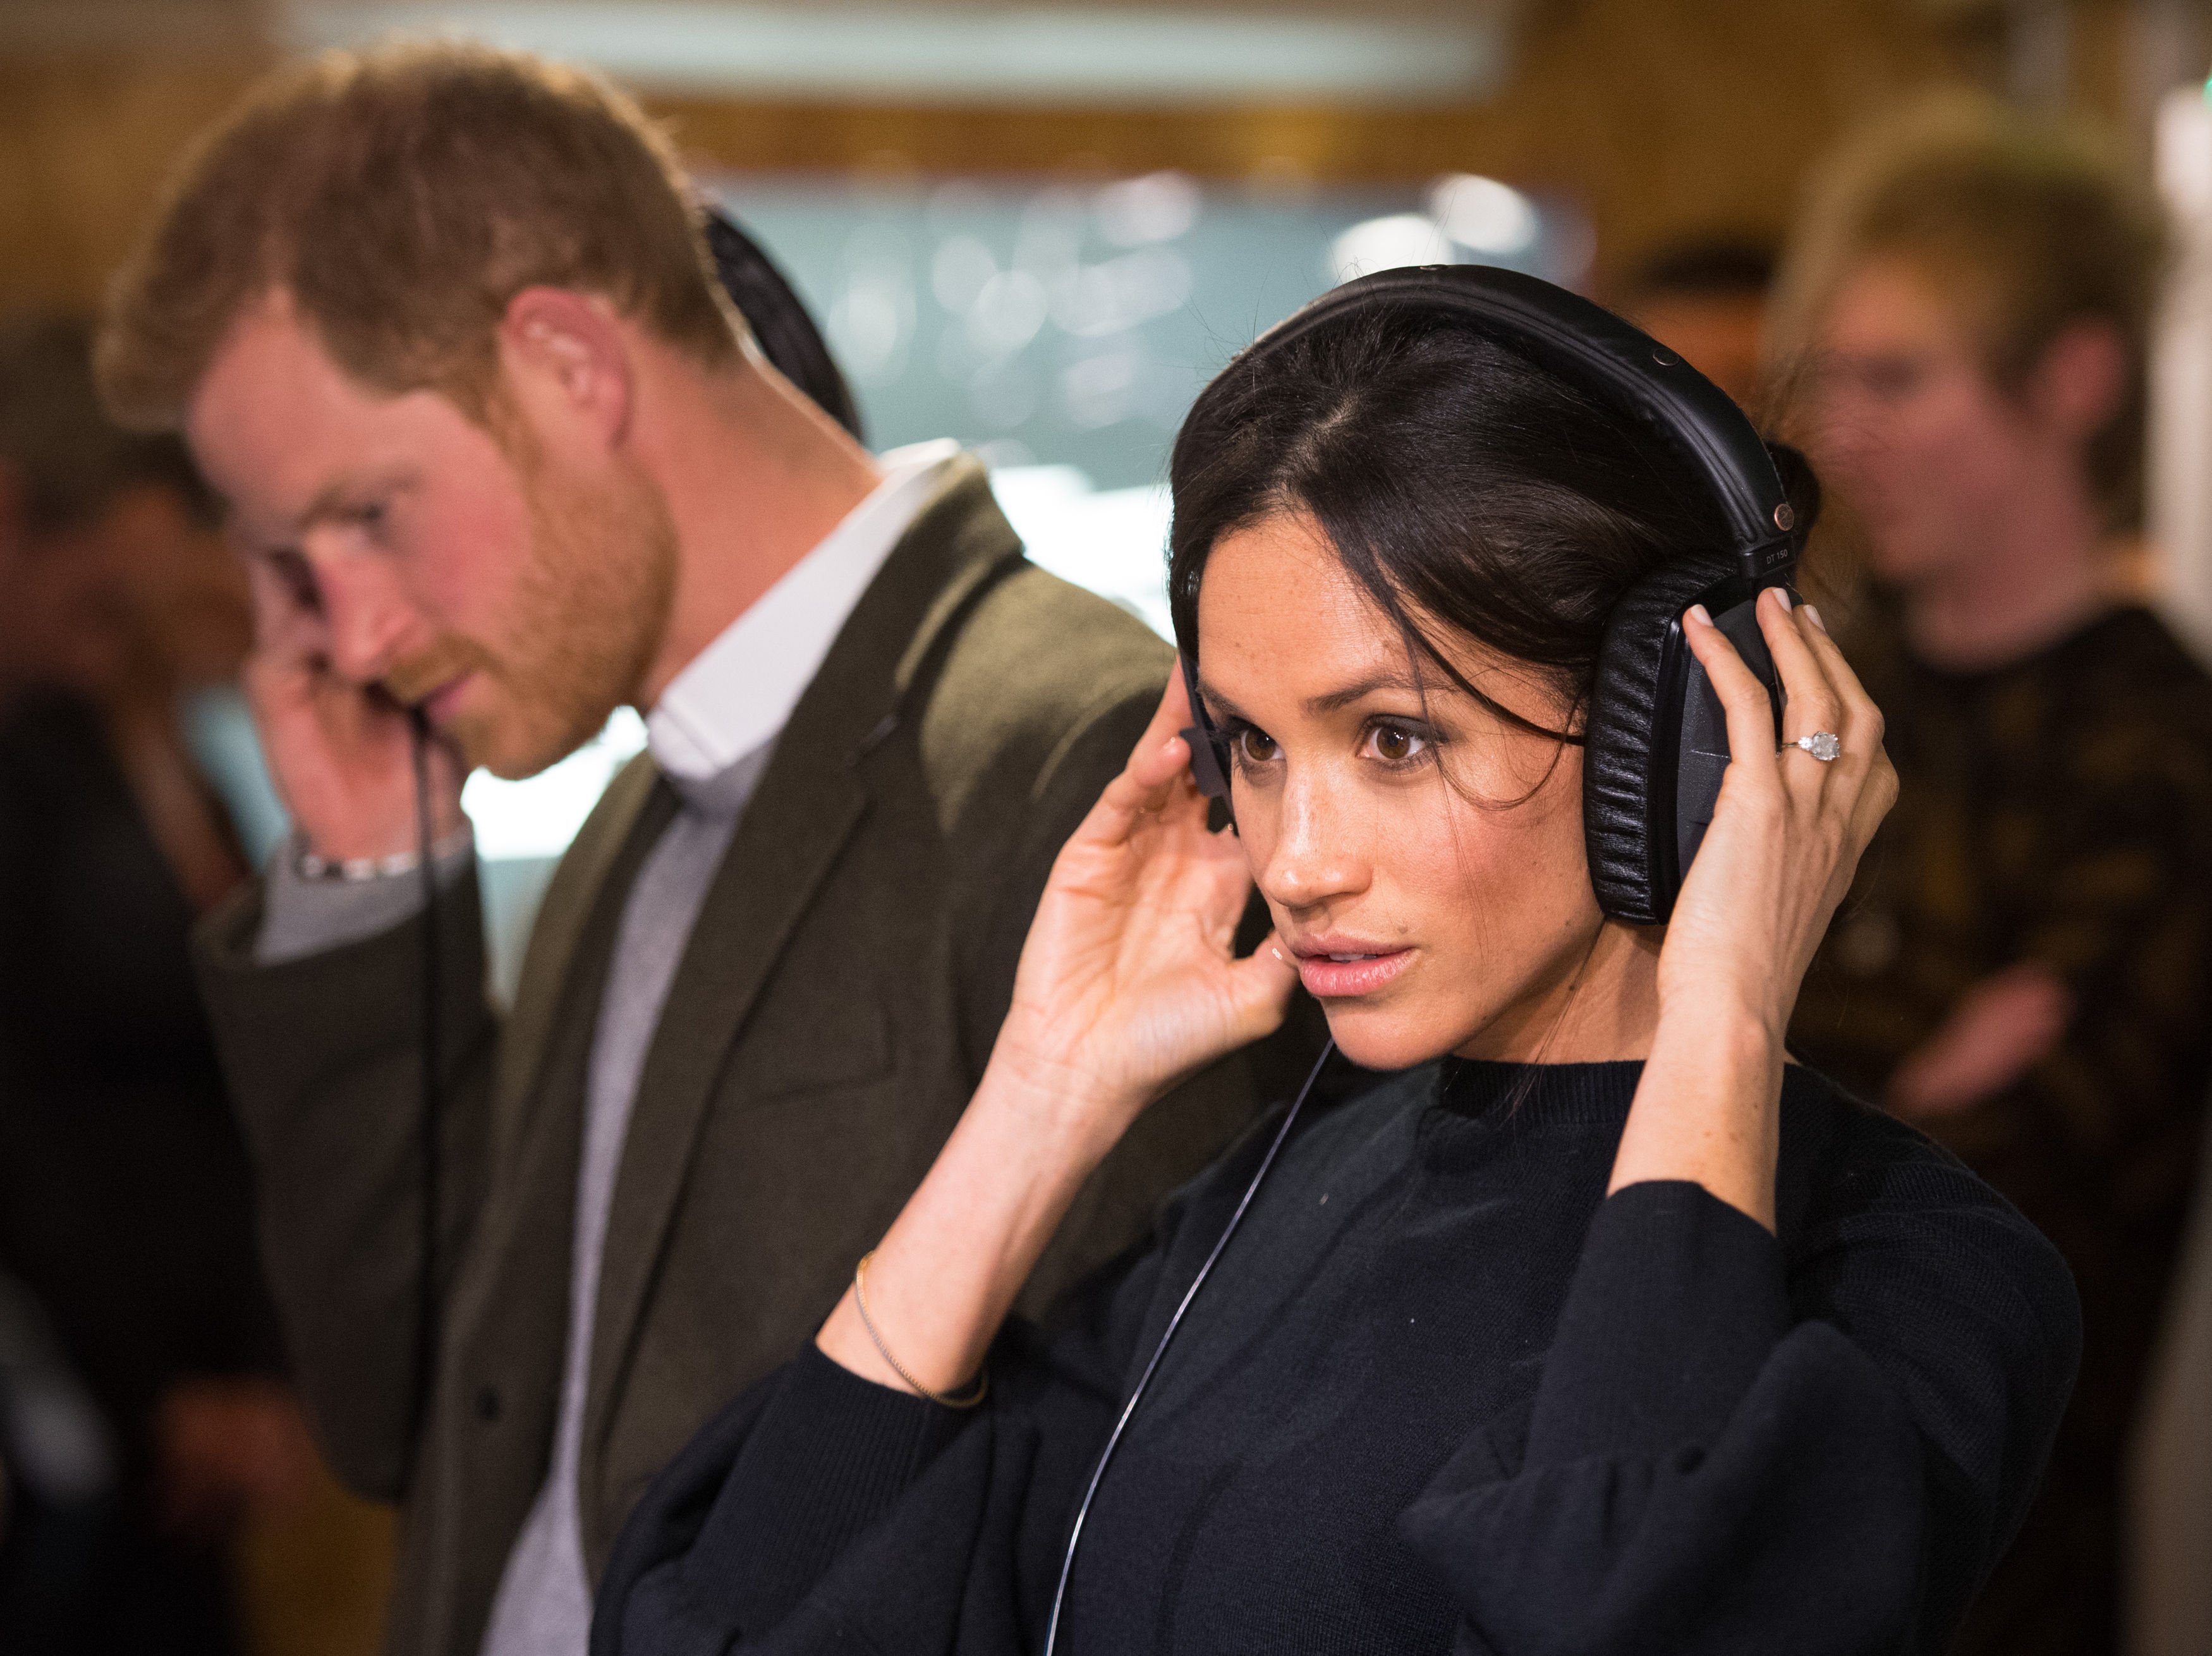 Prince Harry and Meghan Markle listen to a broadcast through headphones at Reprezent 107.3FM in Pop Brixton on January 9, 2018 | Photo: Getty Images